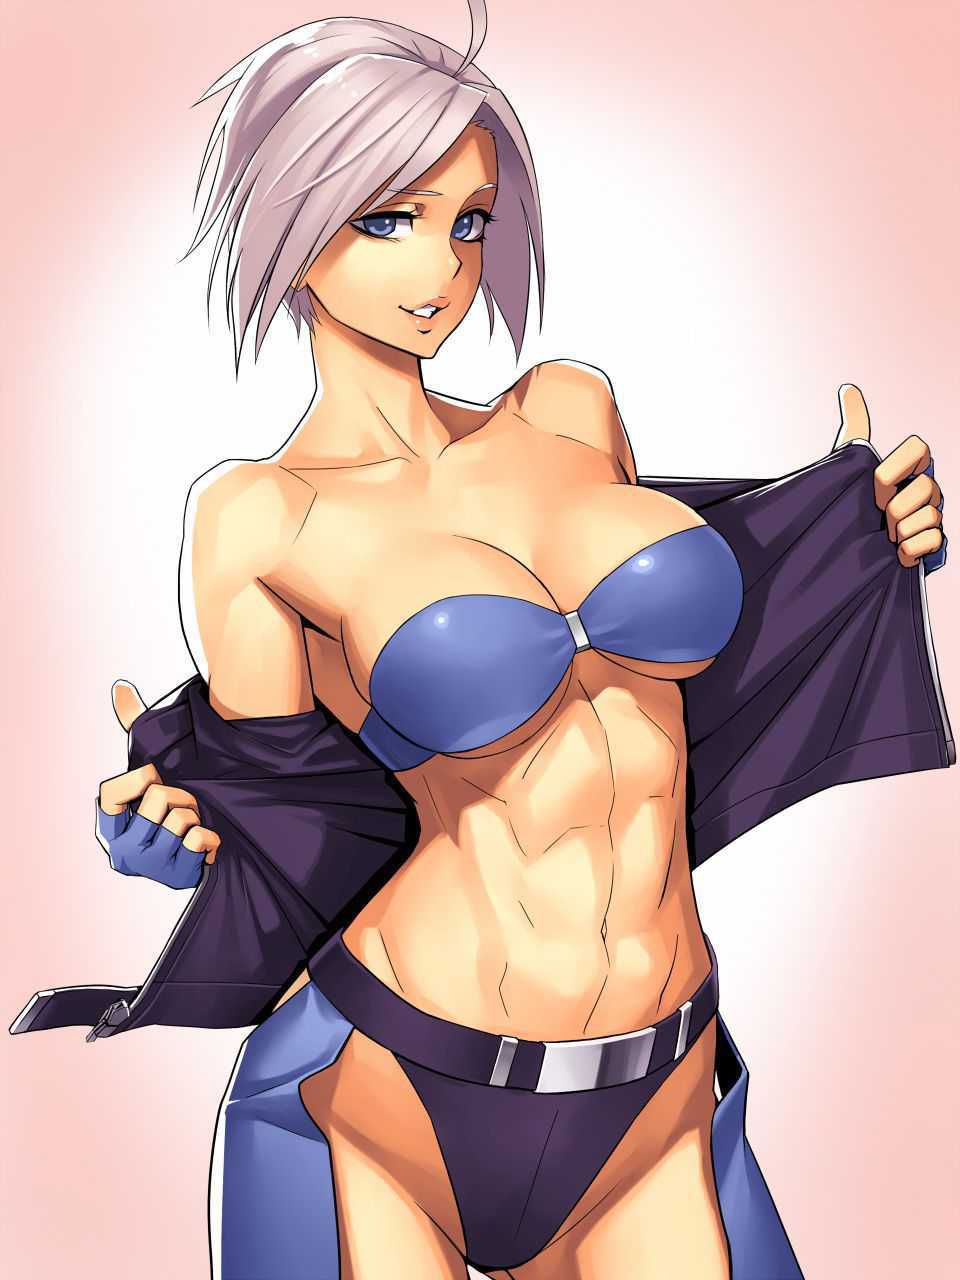 Erotic female fighting game character ever too. 3